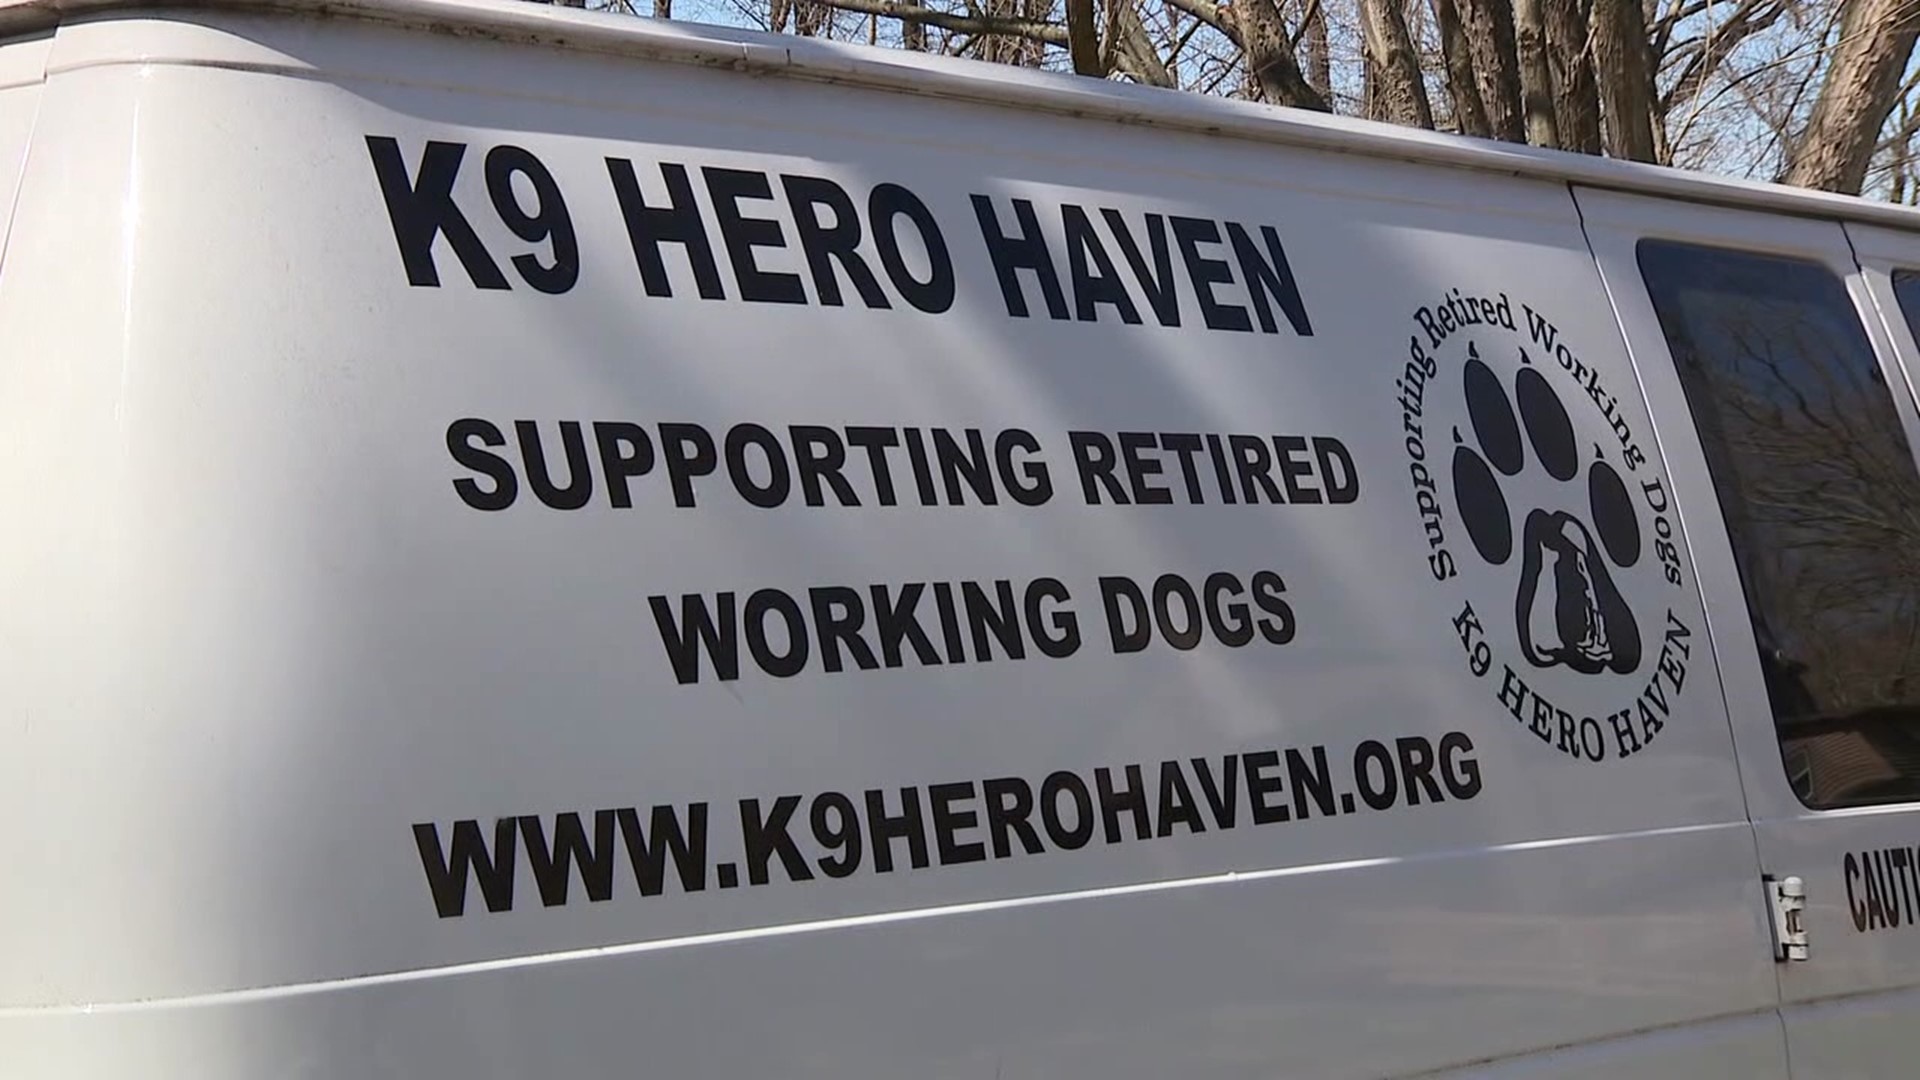 K9 Hero Haven near Herndon takes in retired military and police dogs.